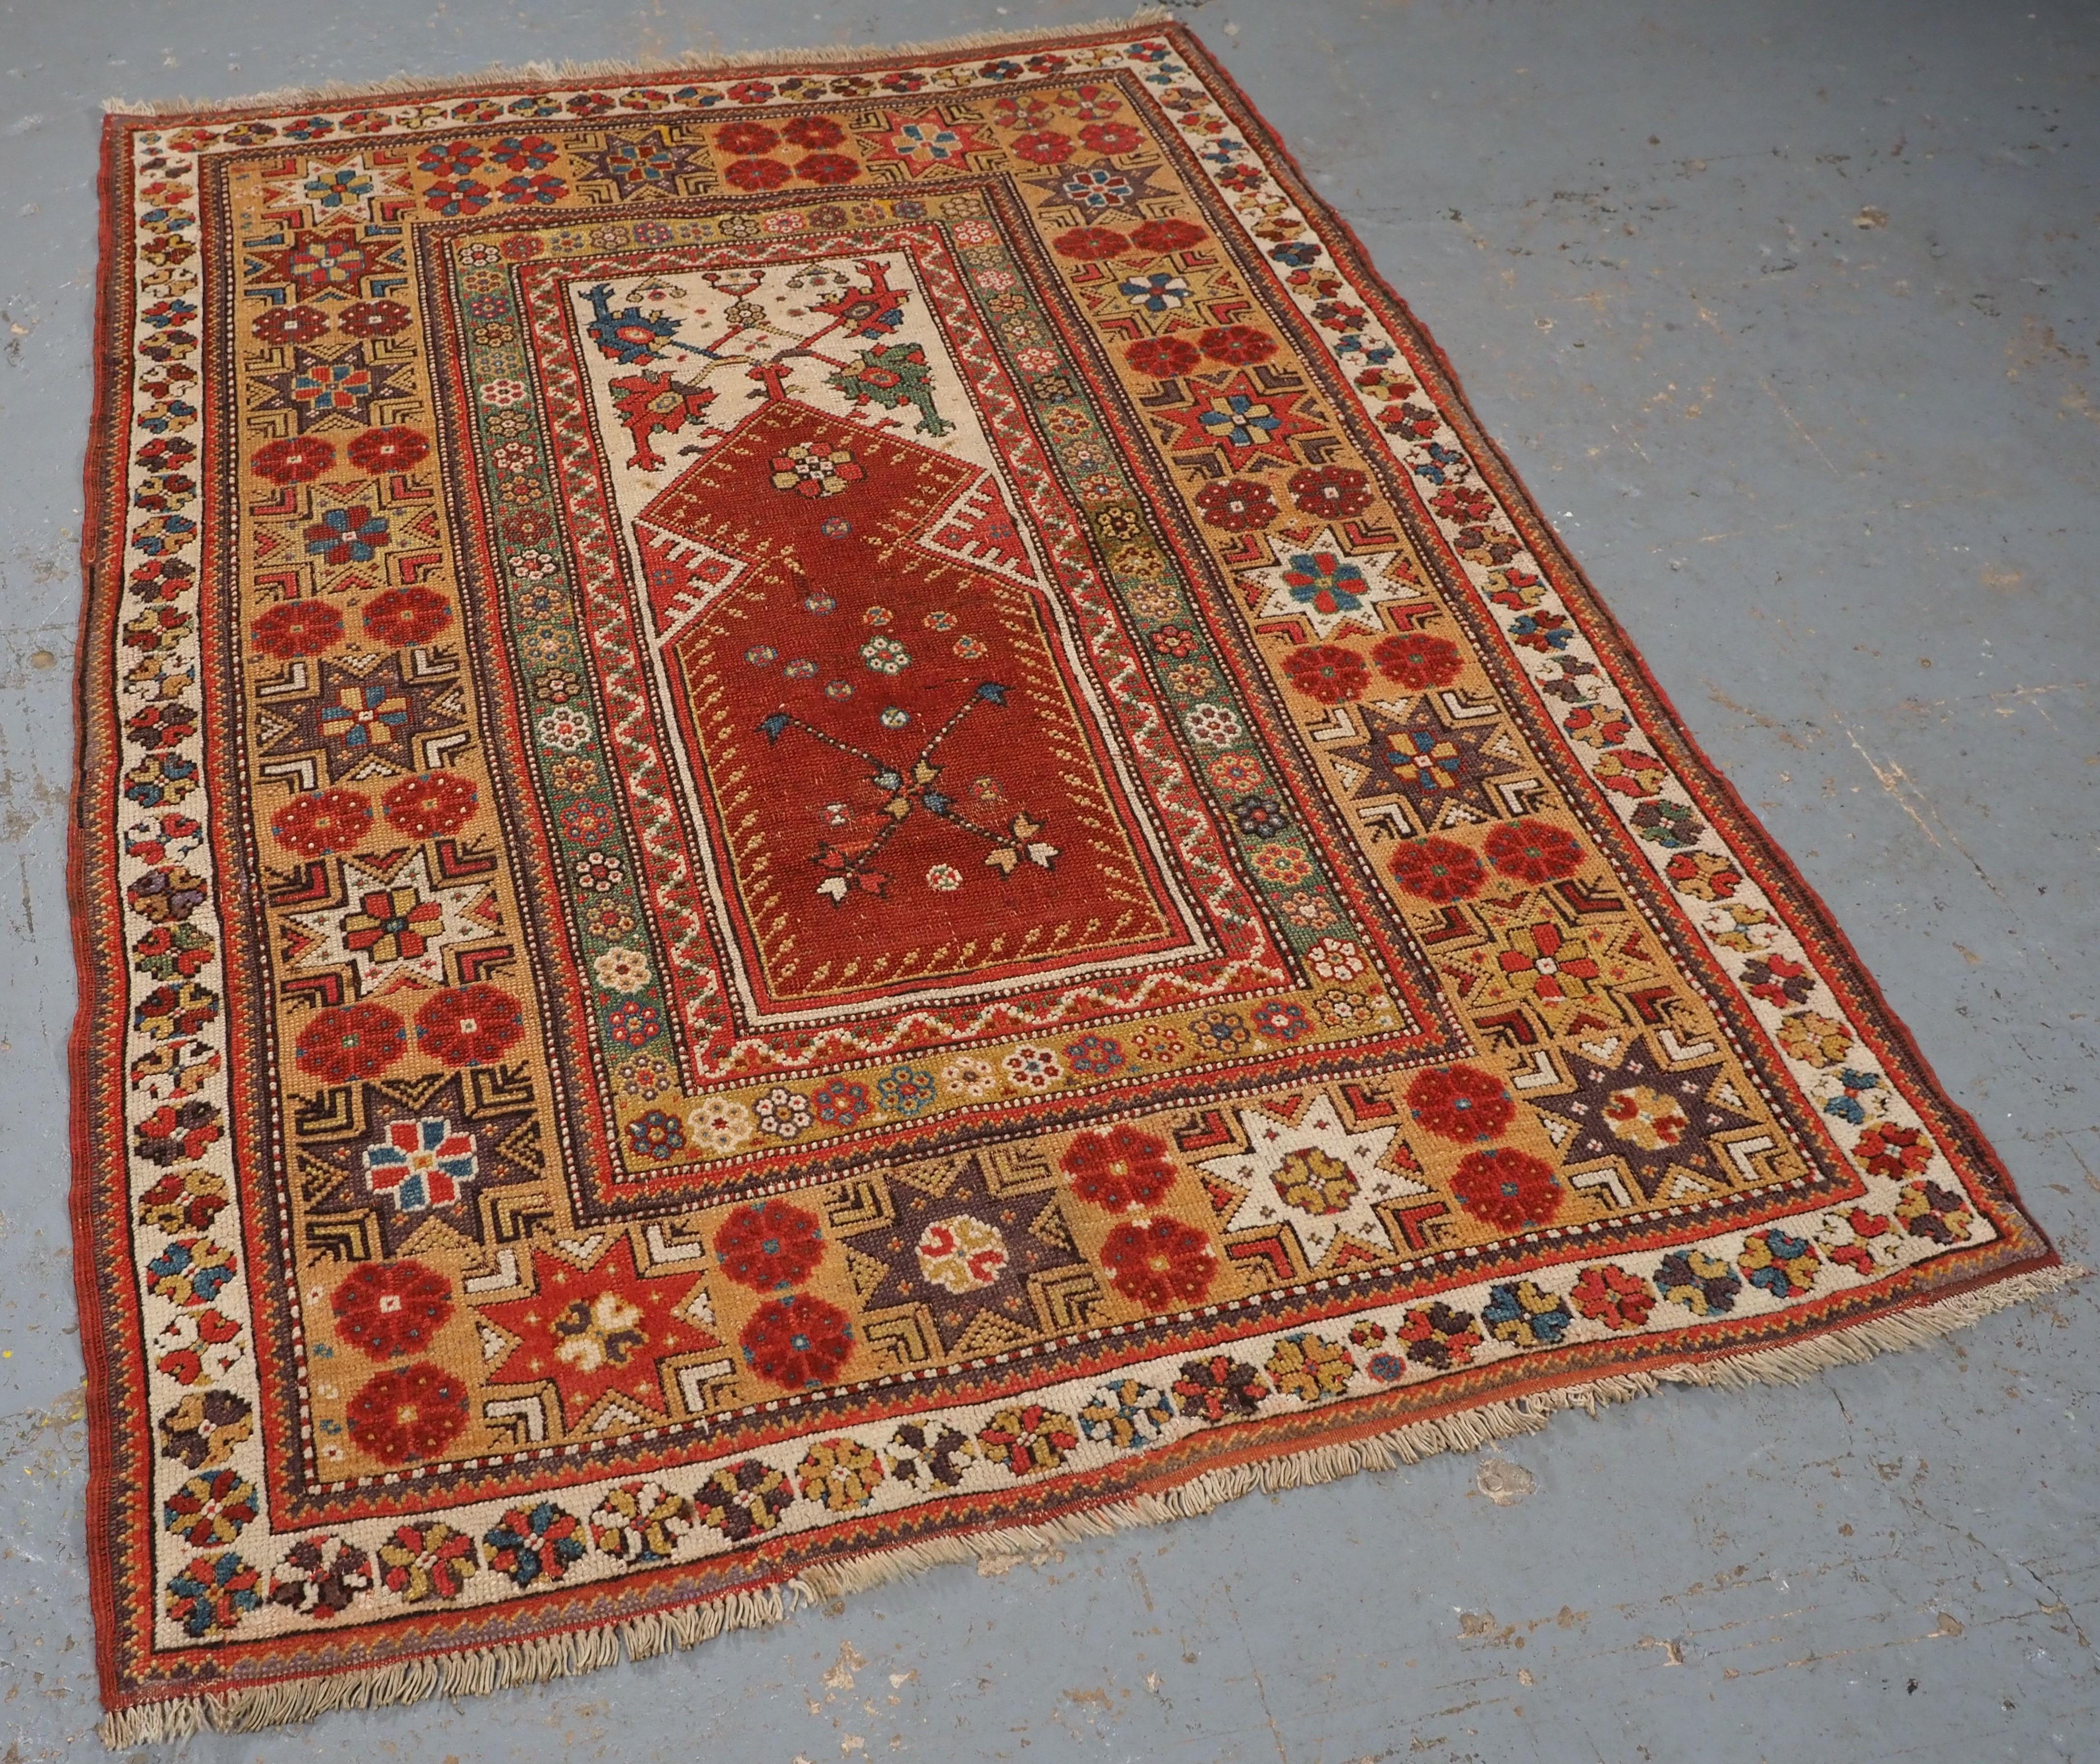 Size: 5ft 8in x 3ft 11in (173 x 120cm).

Antique Turkish Milas prayer rug of classic design with superb soft wool and good colour.

Circa 1800-1825.

The rug has very soft wool and a very floppy handle. The rug is beautifully drawn with superb